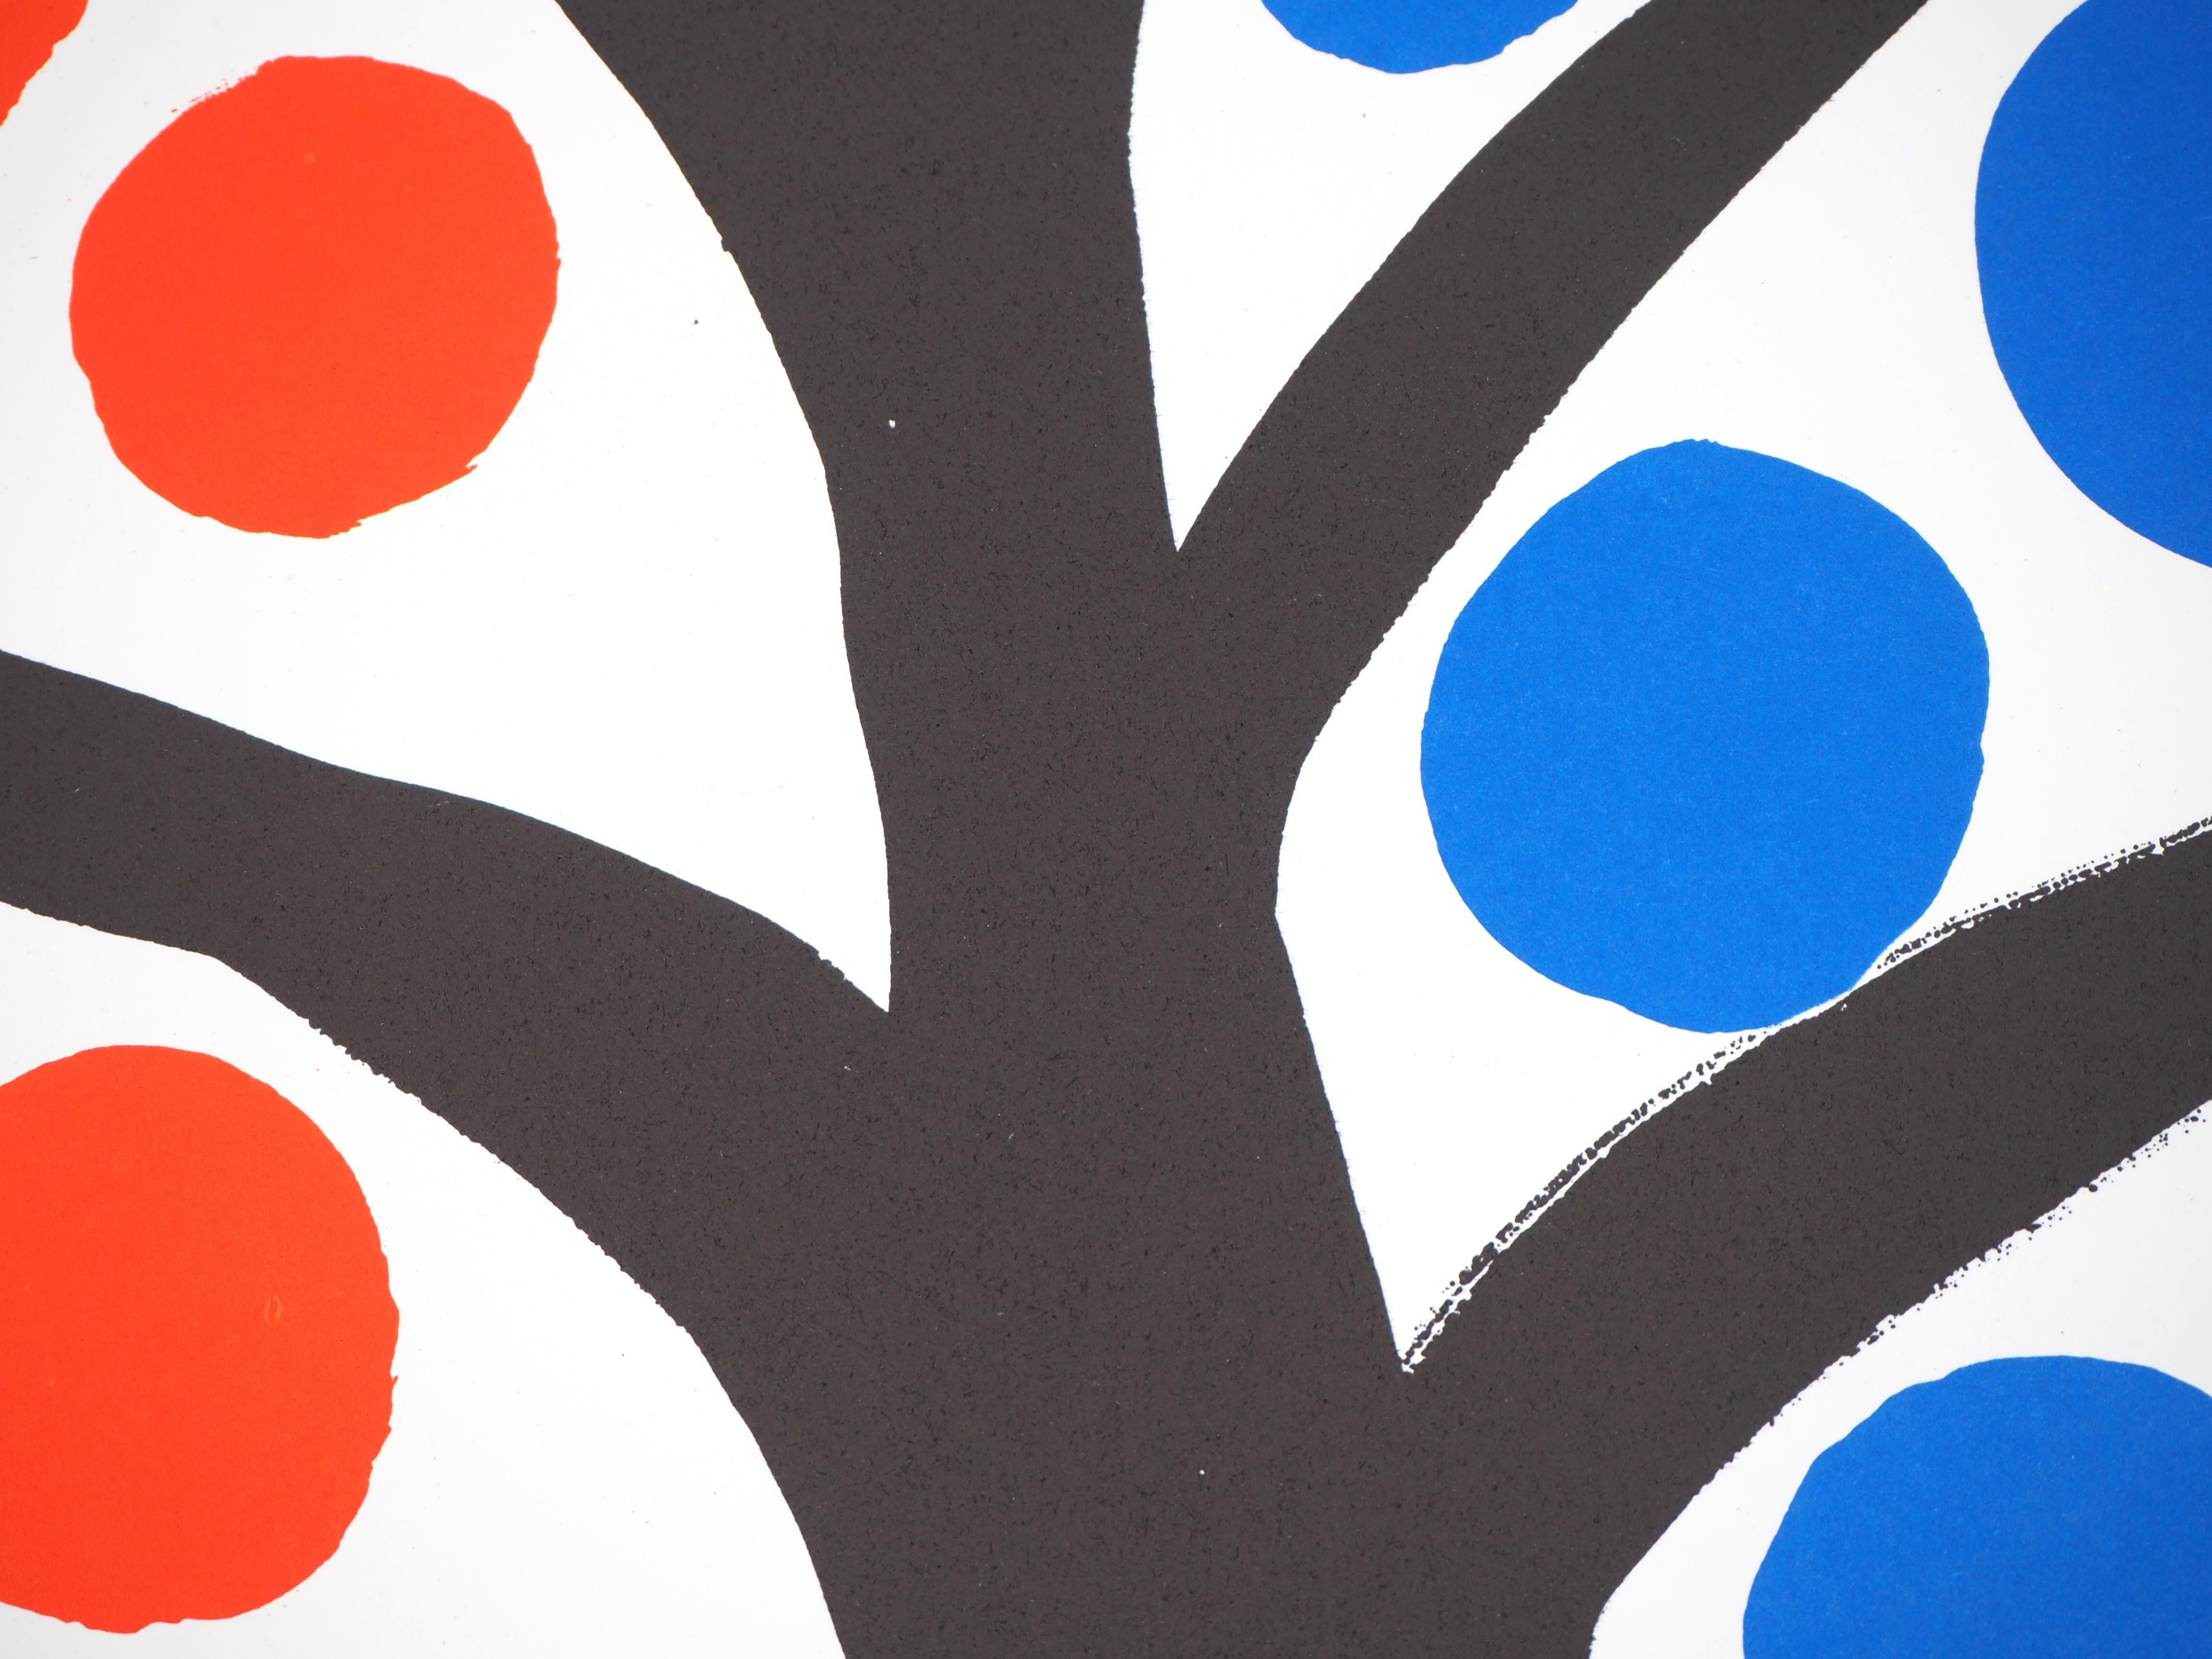 Black tree with red and blue fruits - Lithograph poster - Maeght 1971 - Abstract Geometric Print by (after) Alexander Calder